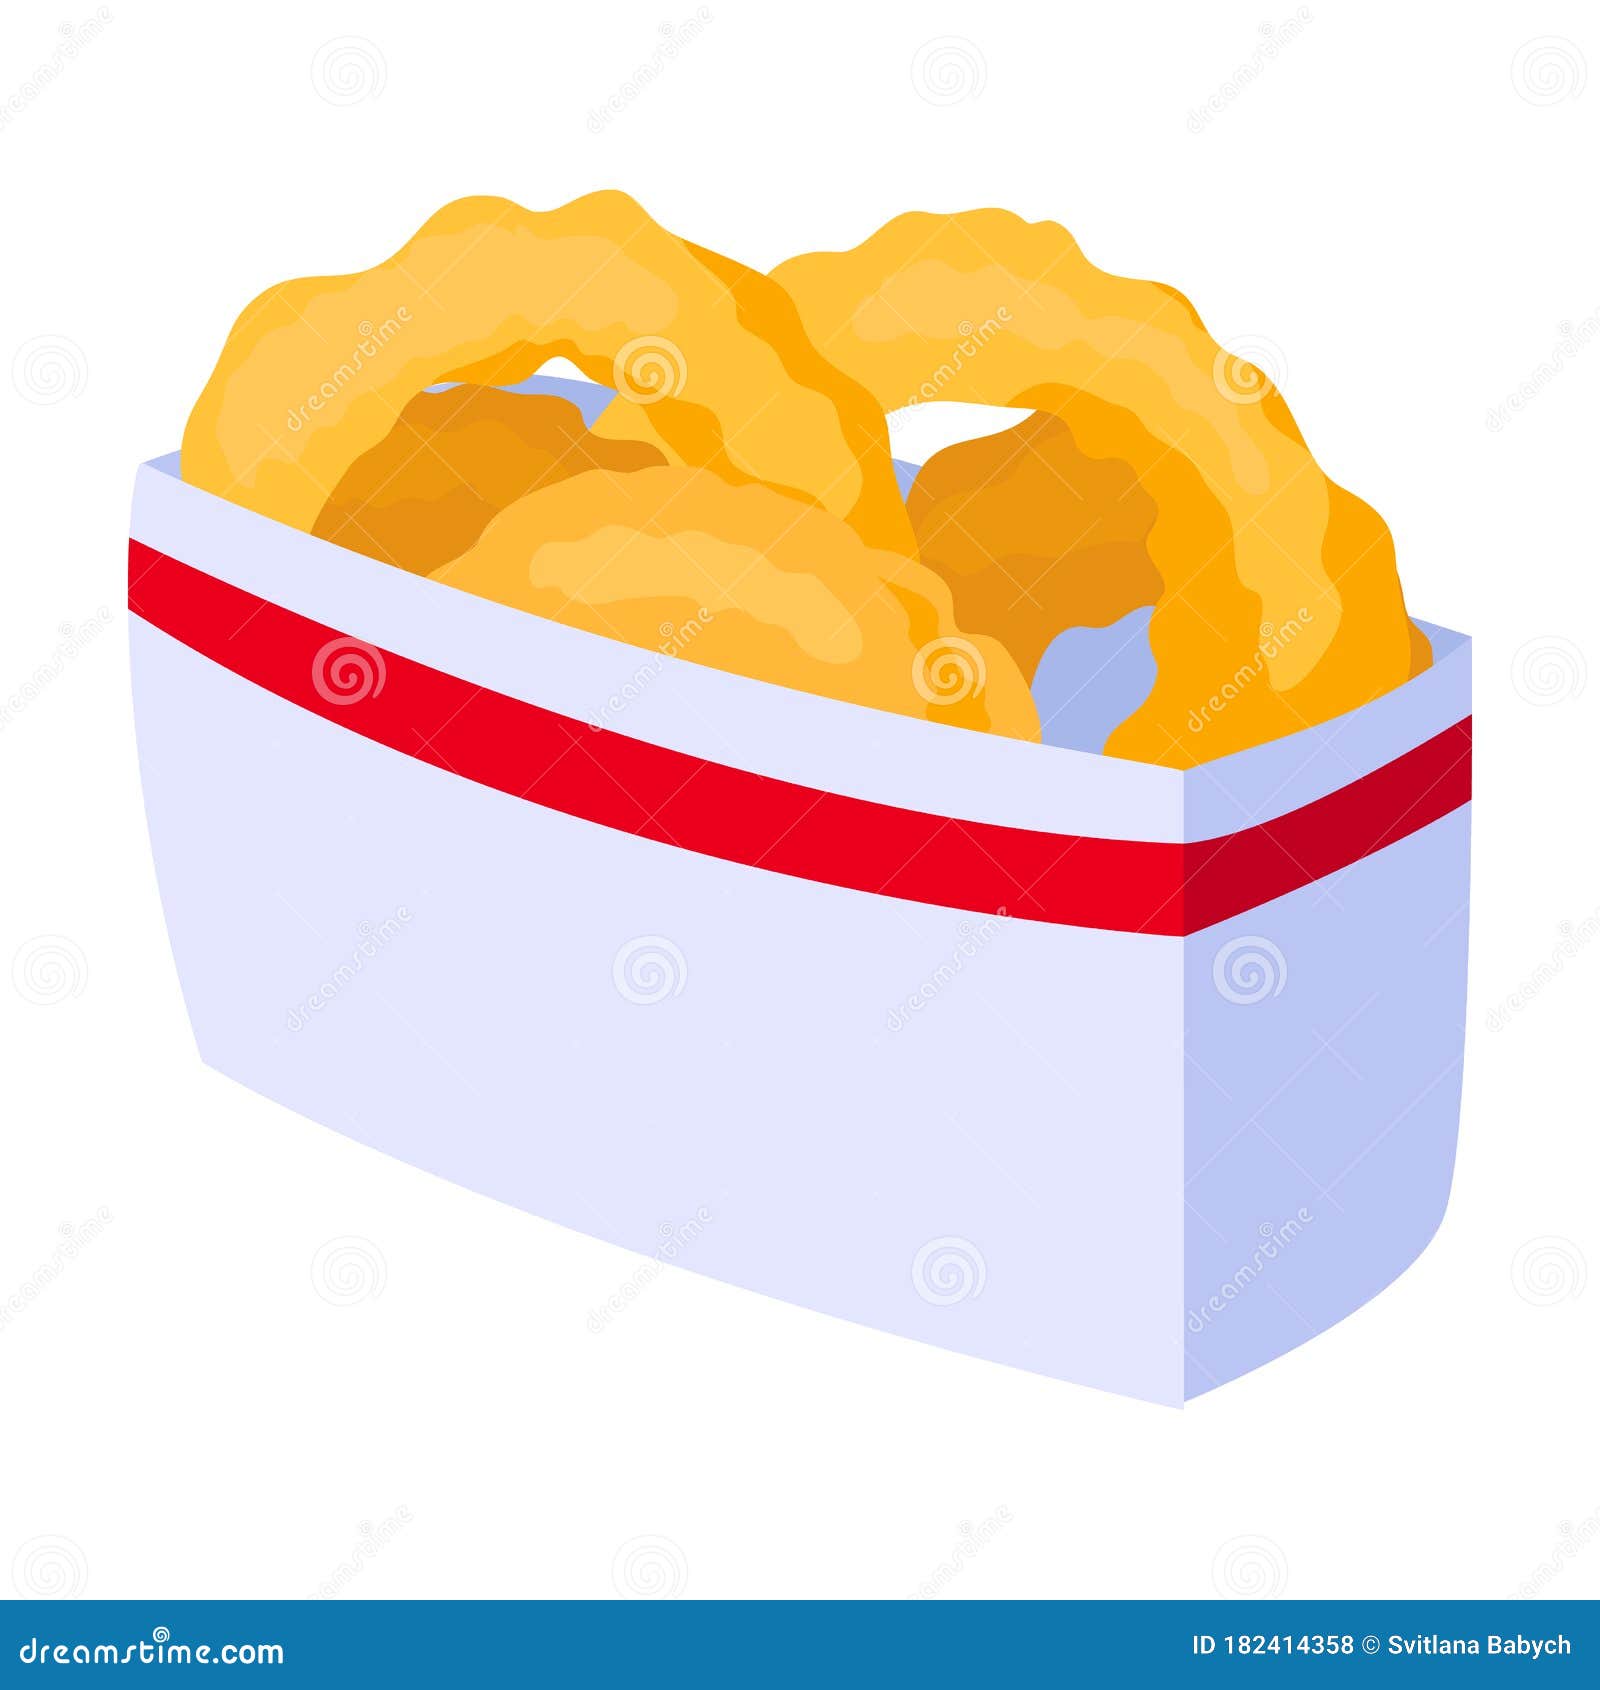 173 Onion Rings 3D Illustrations - Free in PNG, BLEND, glTF - IconScout